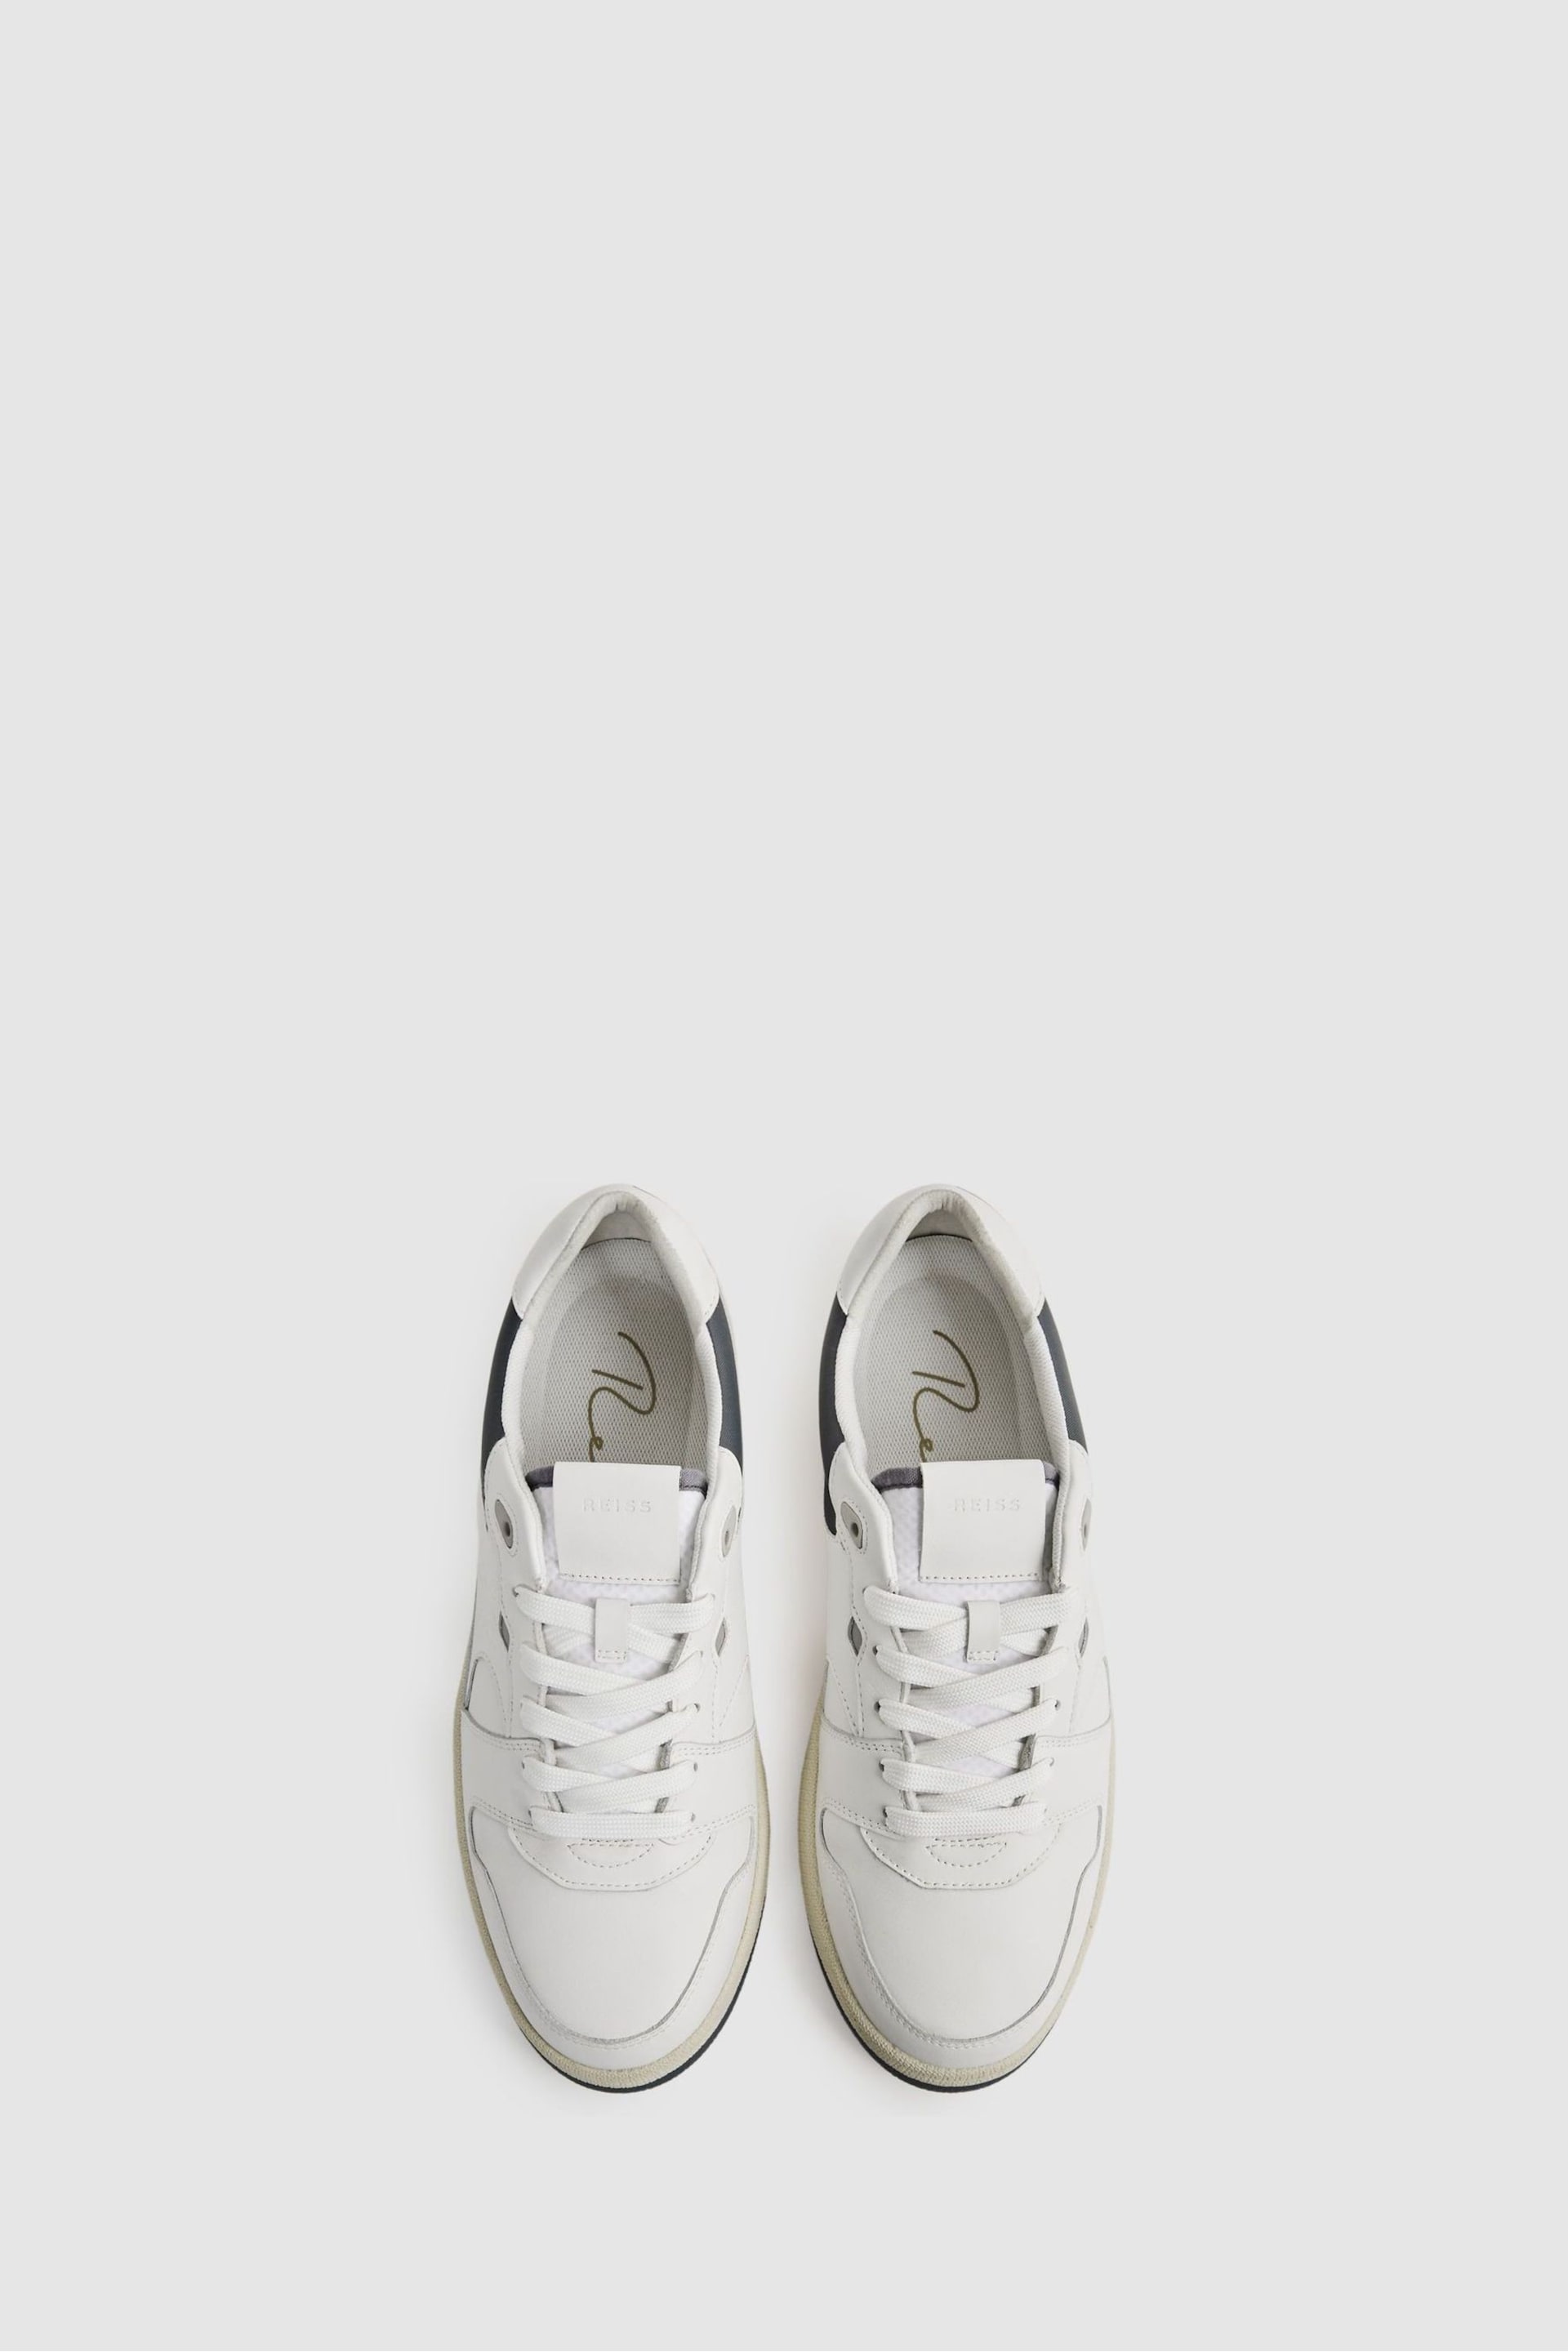 Reiss White Astor Leather Lace-Up Trainers - Image 3 of 5